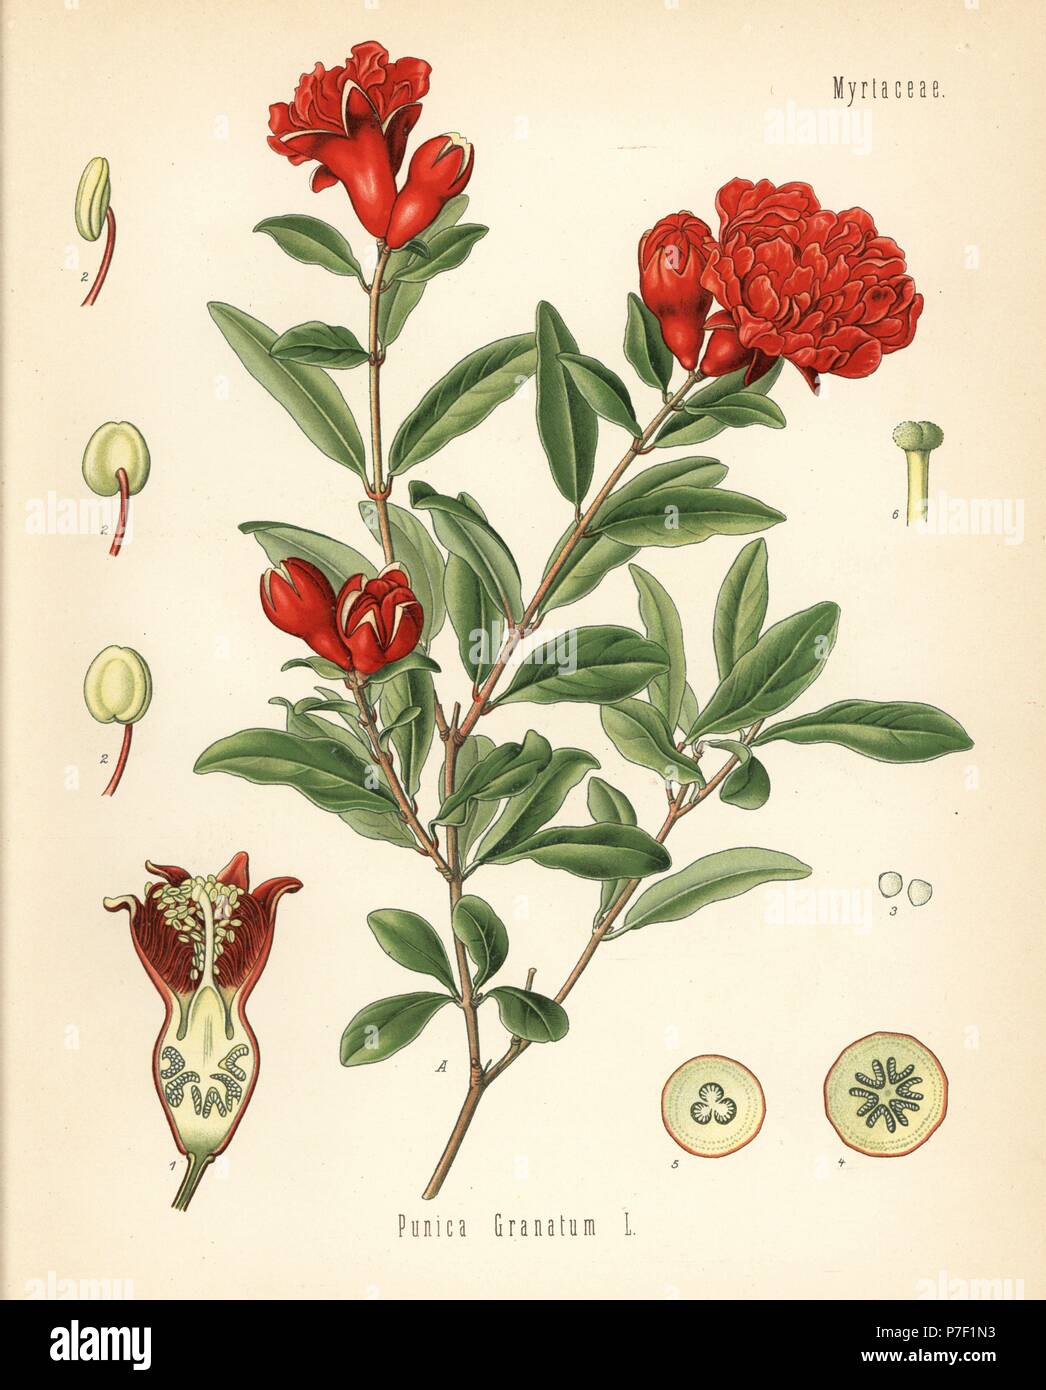 Pomegranate, Punica granatum. Chromolithograph after a botanical illustration from Hermann Adolph Koehler's Medicinal Plants, edited by Gustav Pabst, Koehler, Germany, 1887. Stock Photo